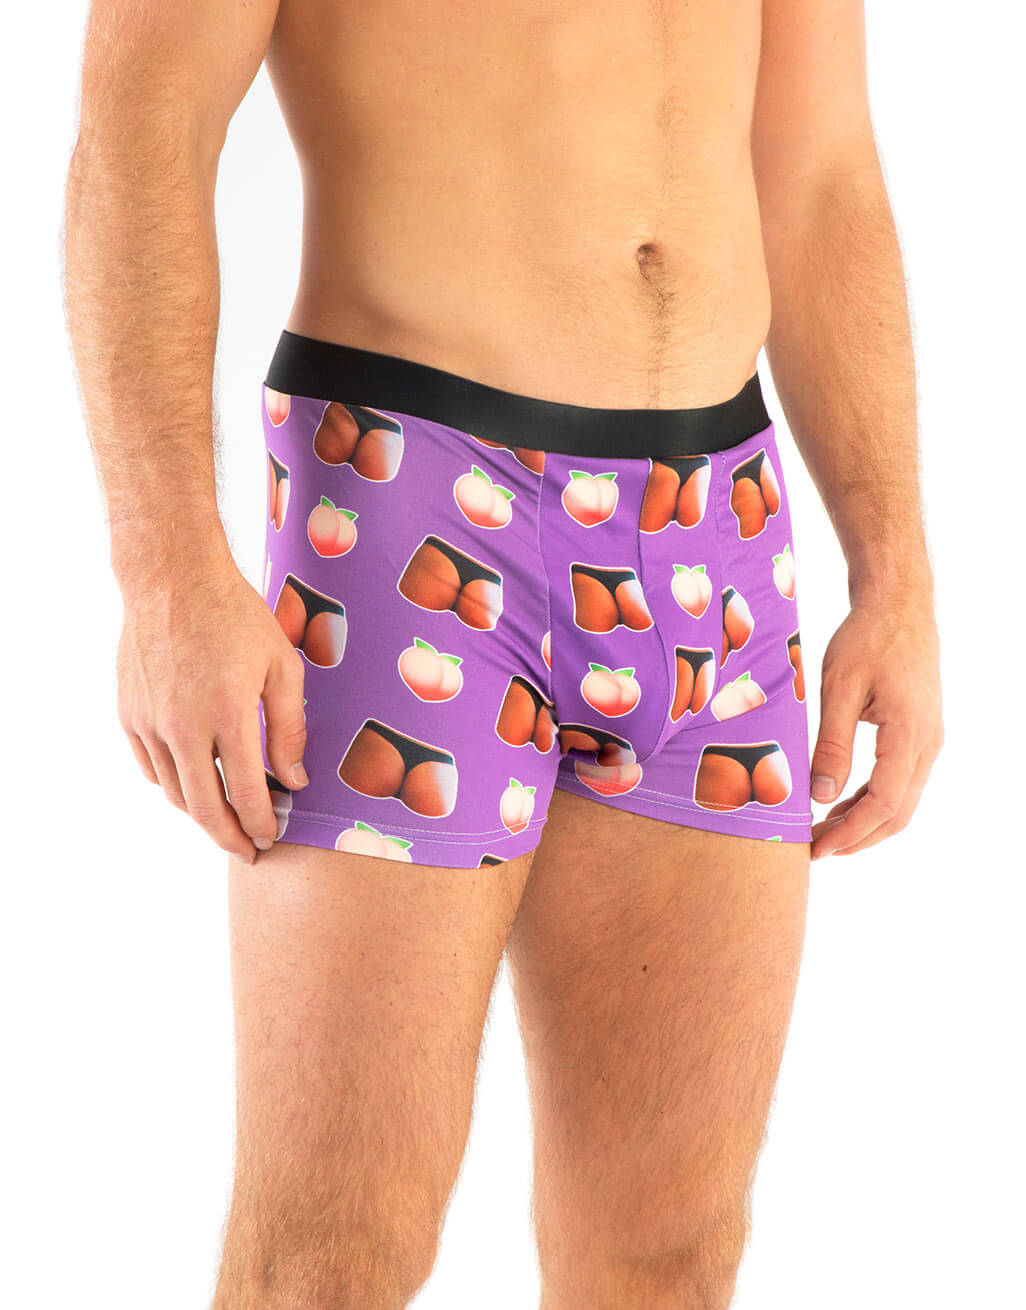  Jonisquees Personalised Gifts Personalised Boxers Men